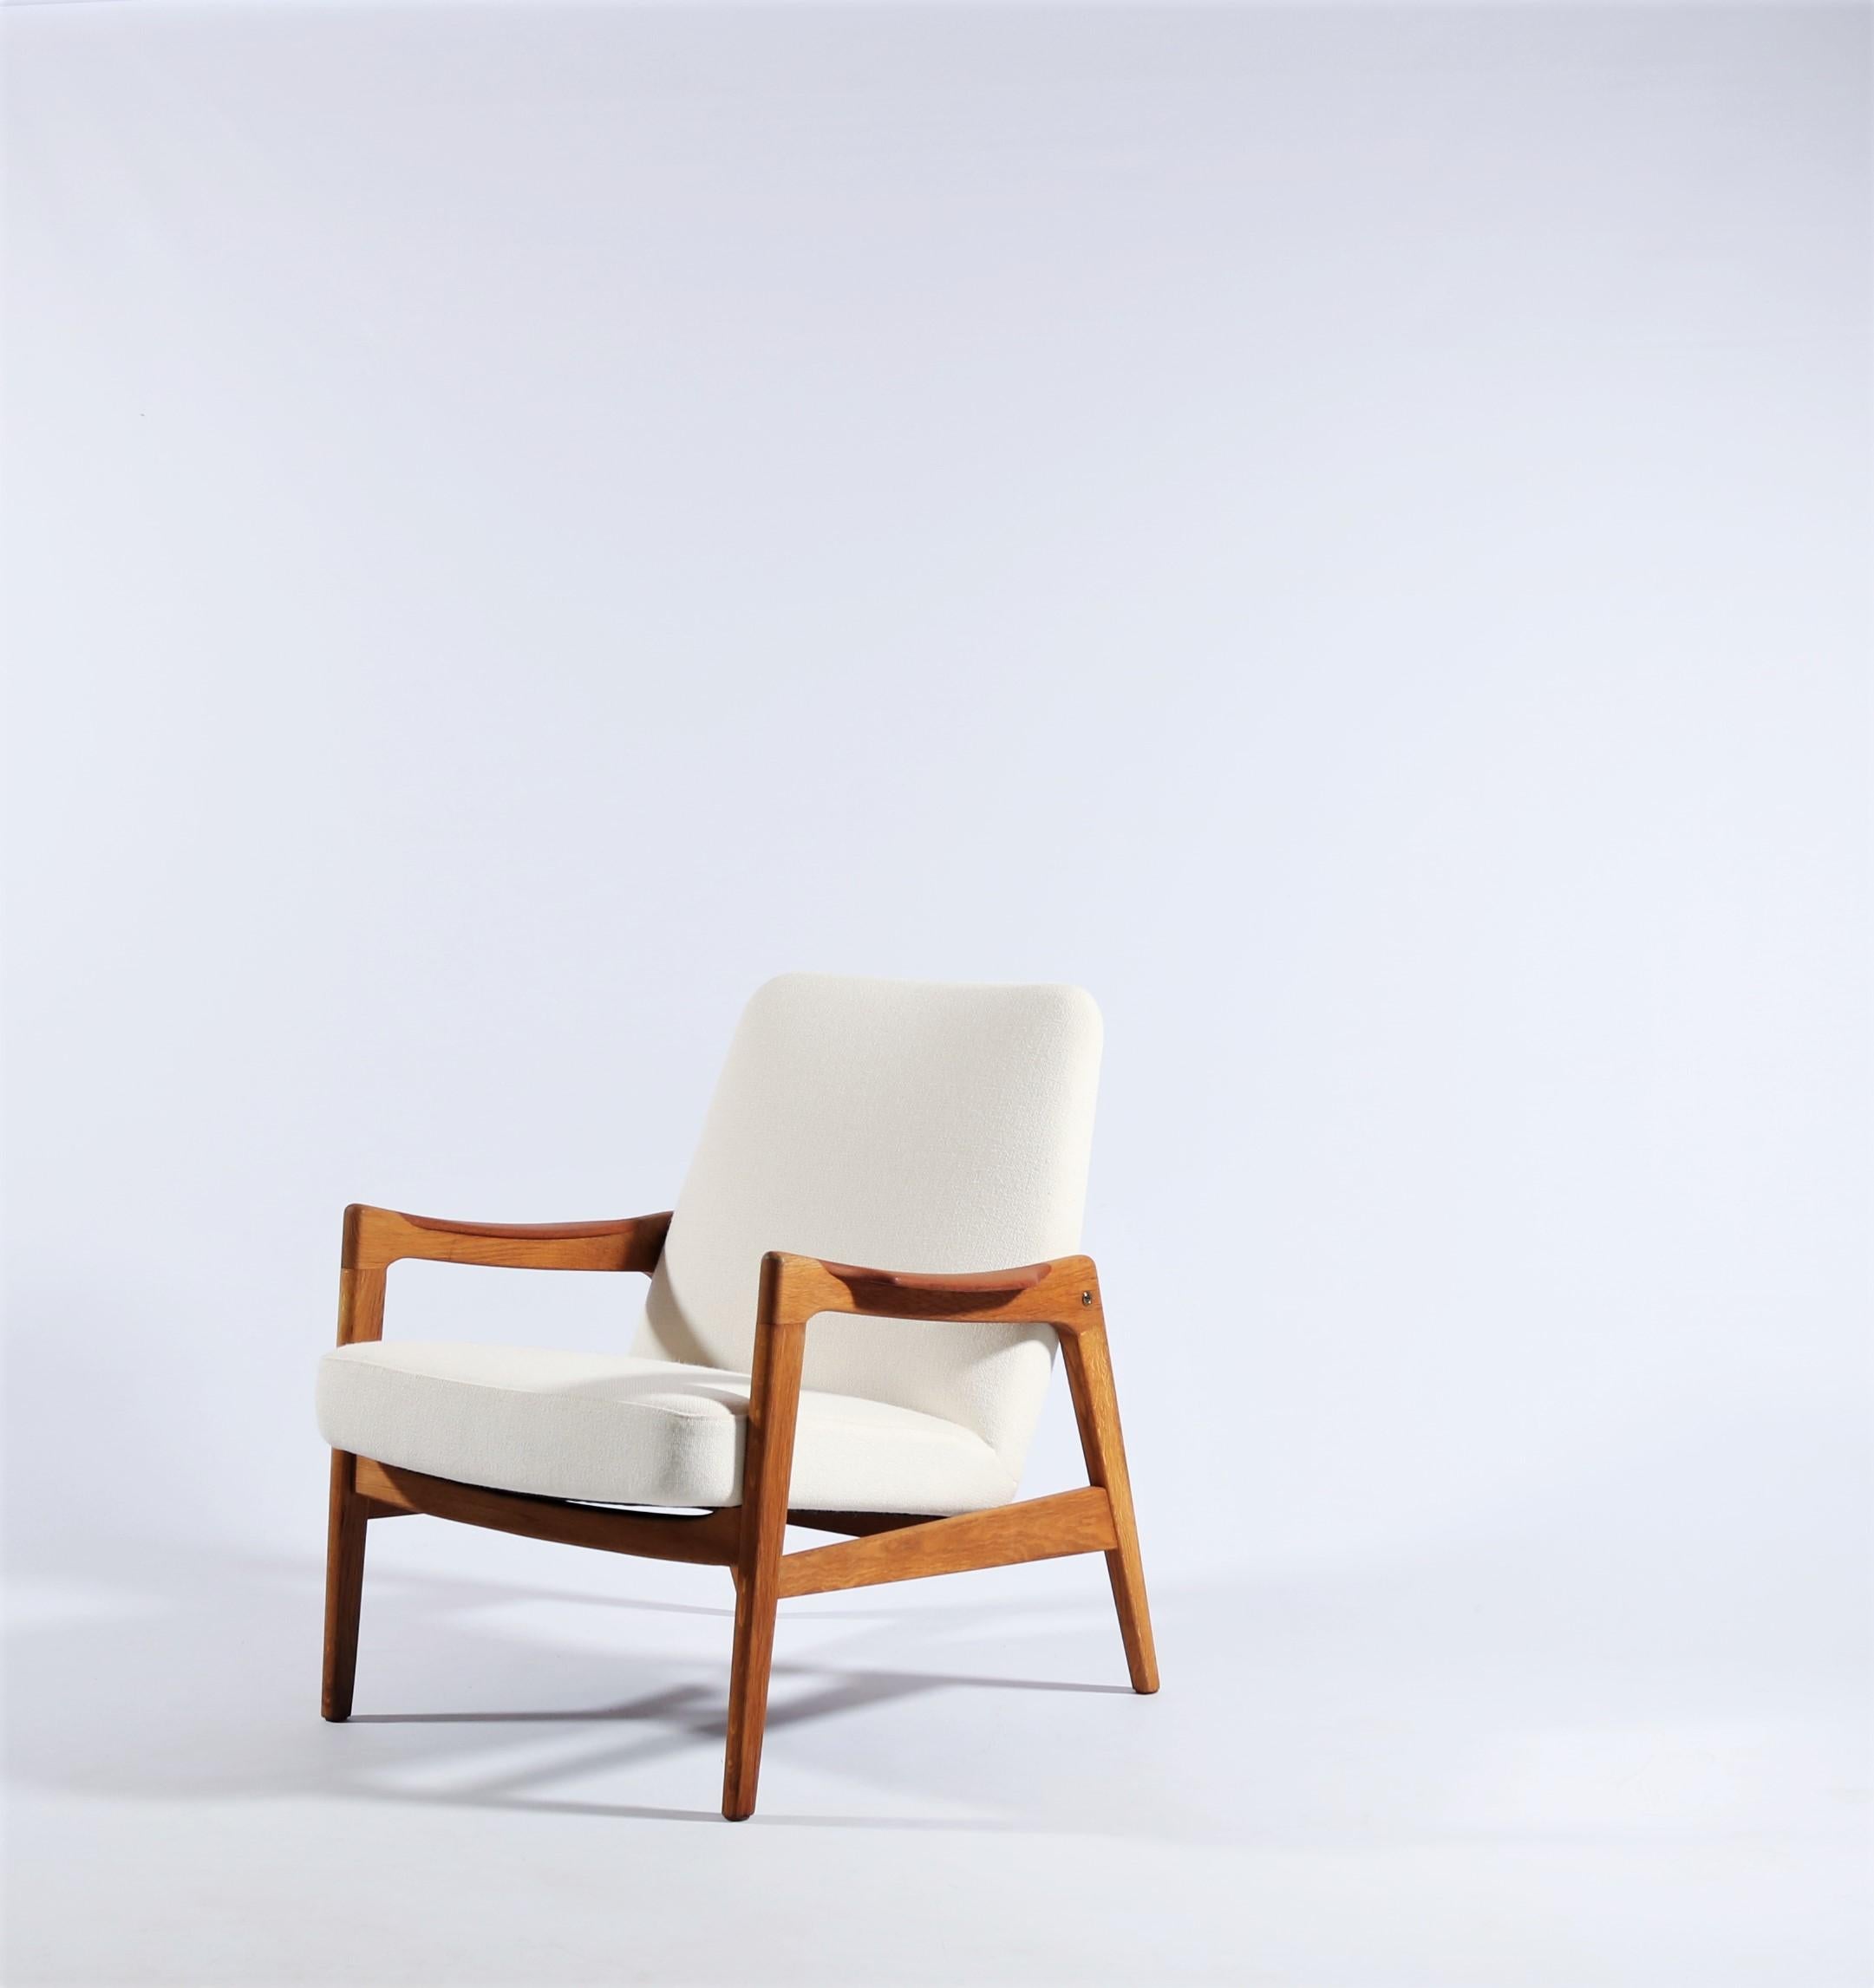 Stunning 1950s easy chair by Danish cabinetmaker. Newly reupholstered in high quality white 